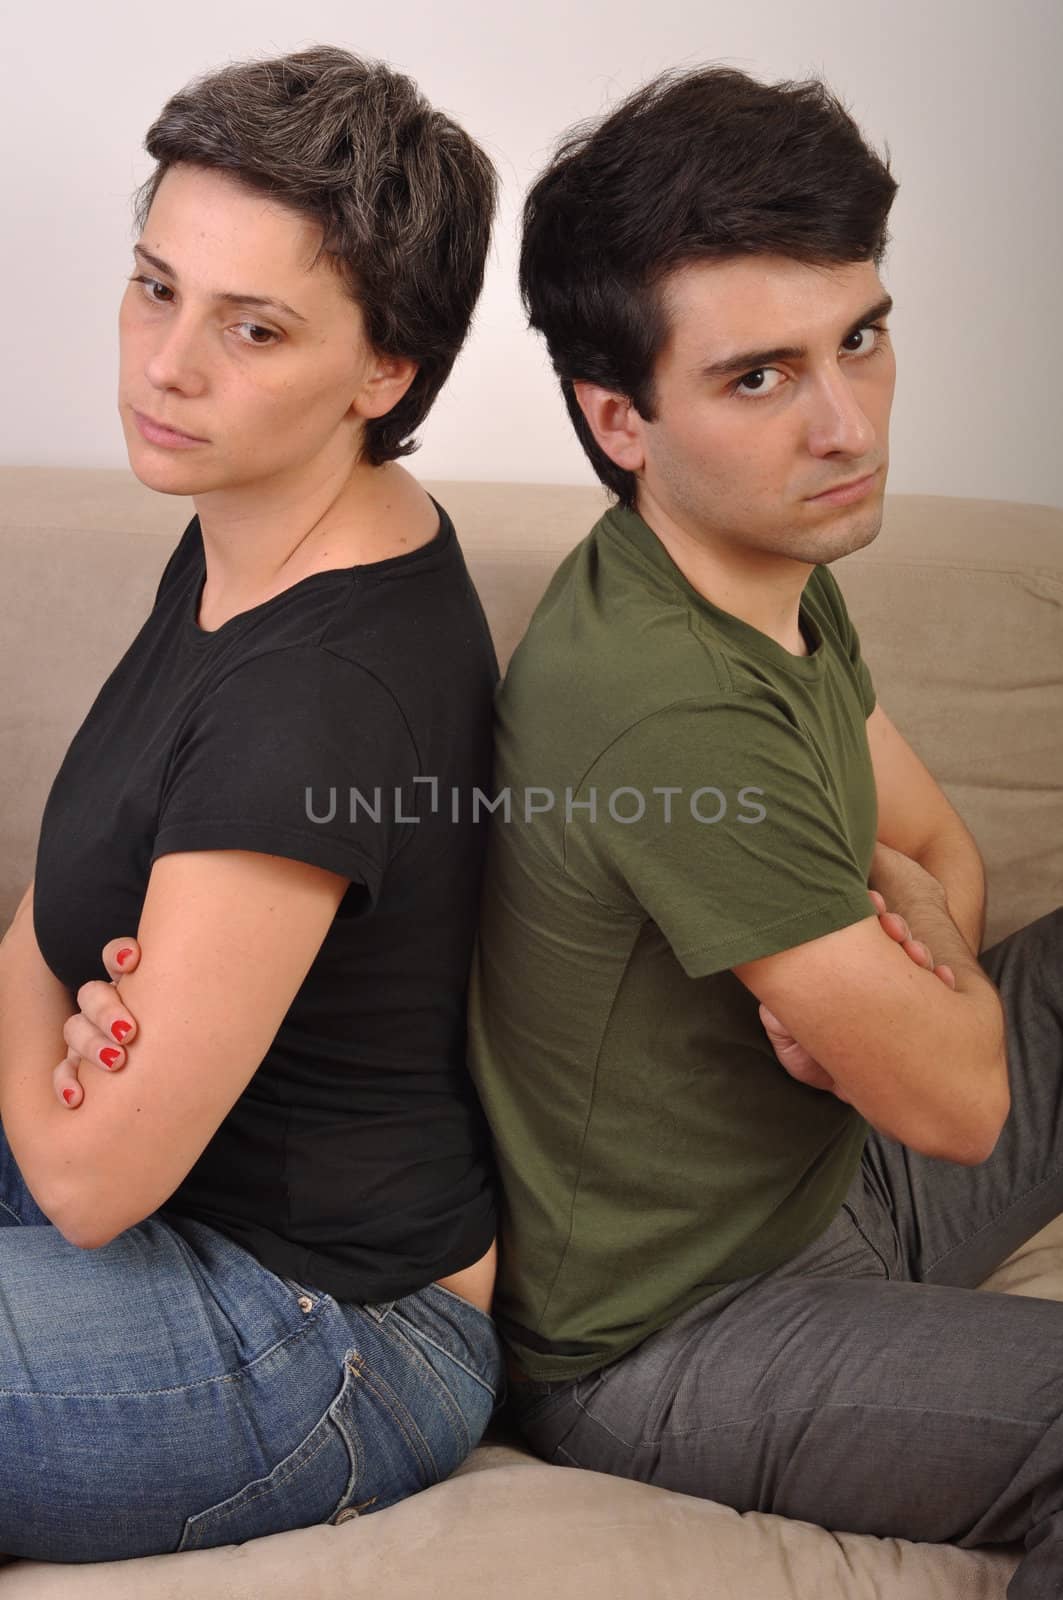 sister and brother are upset with each other